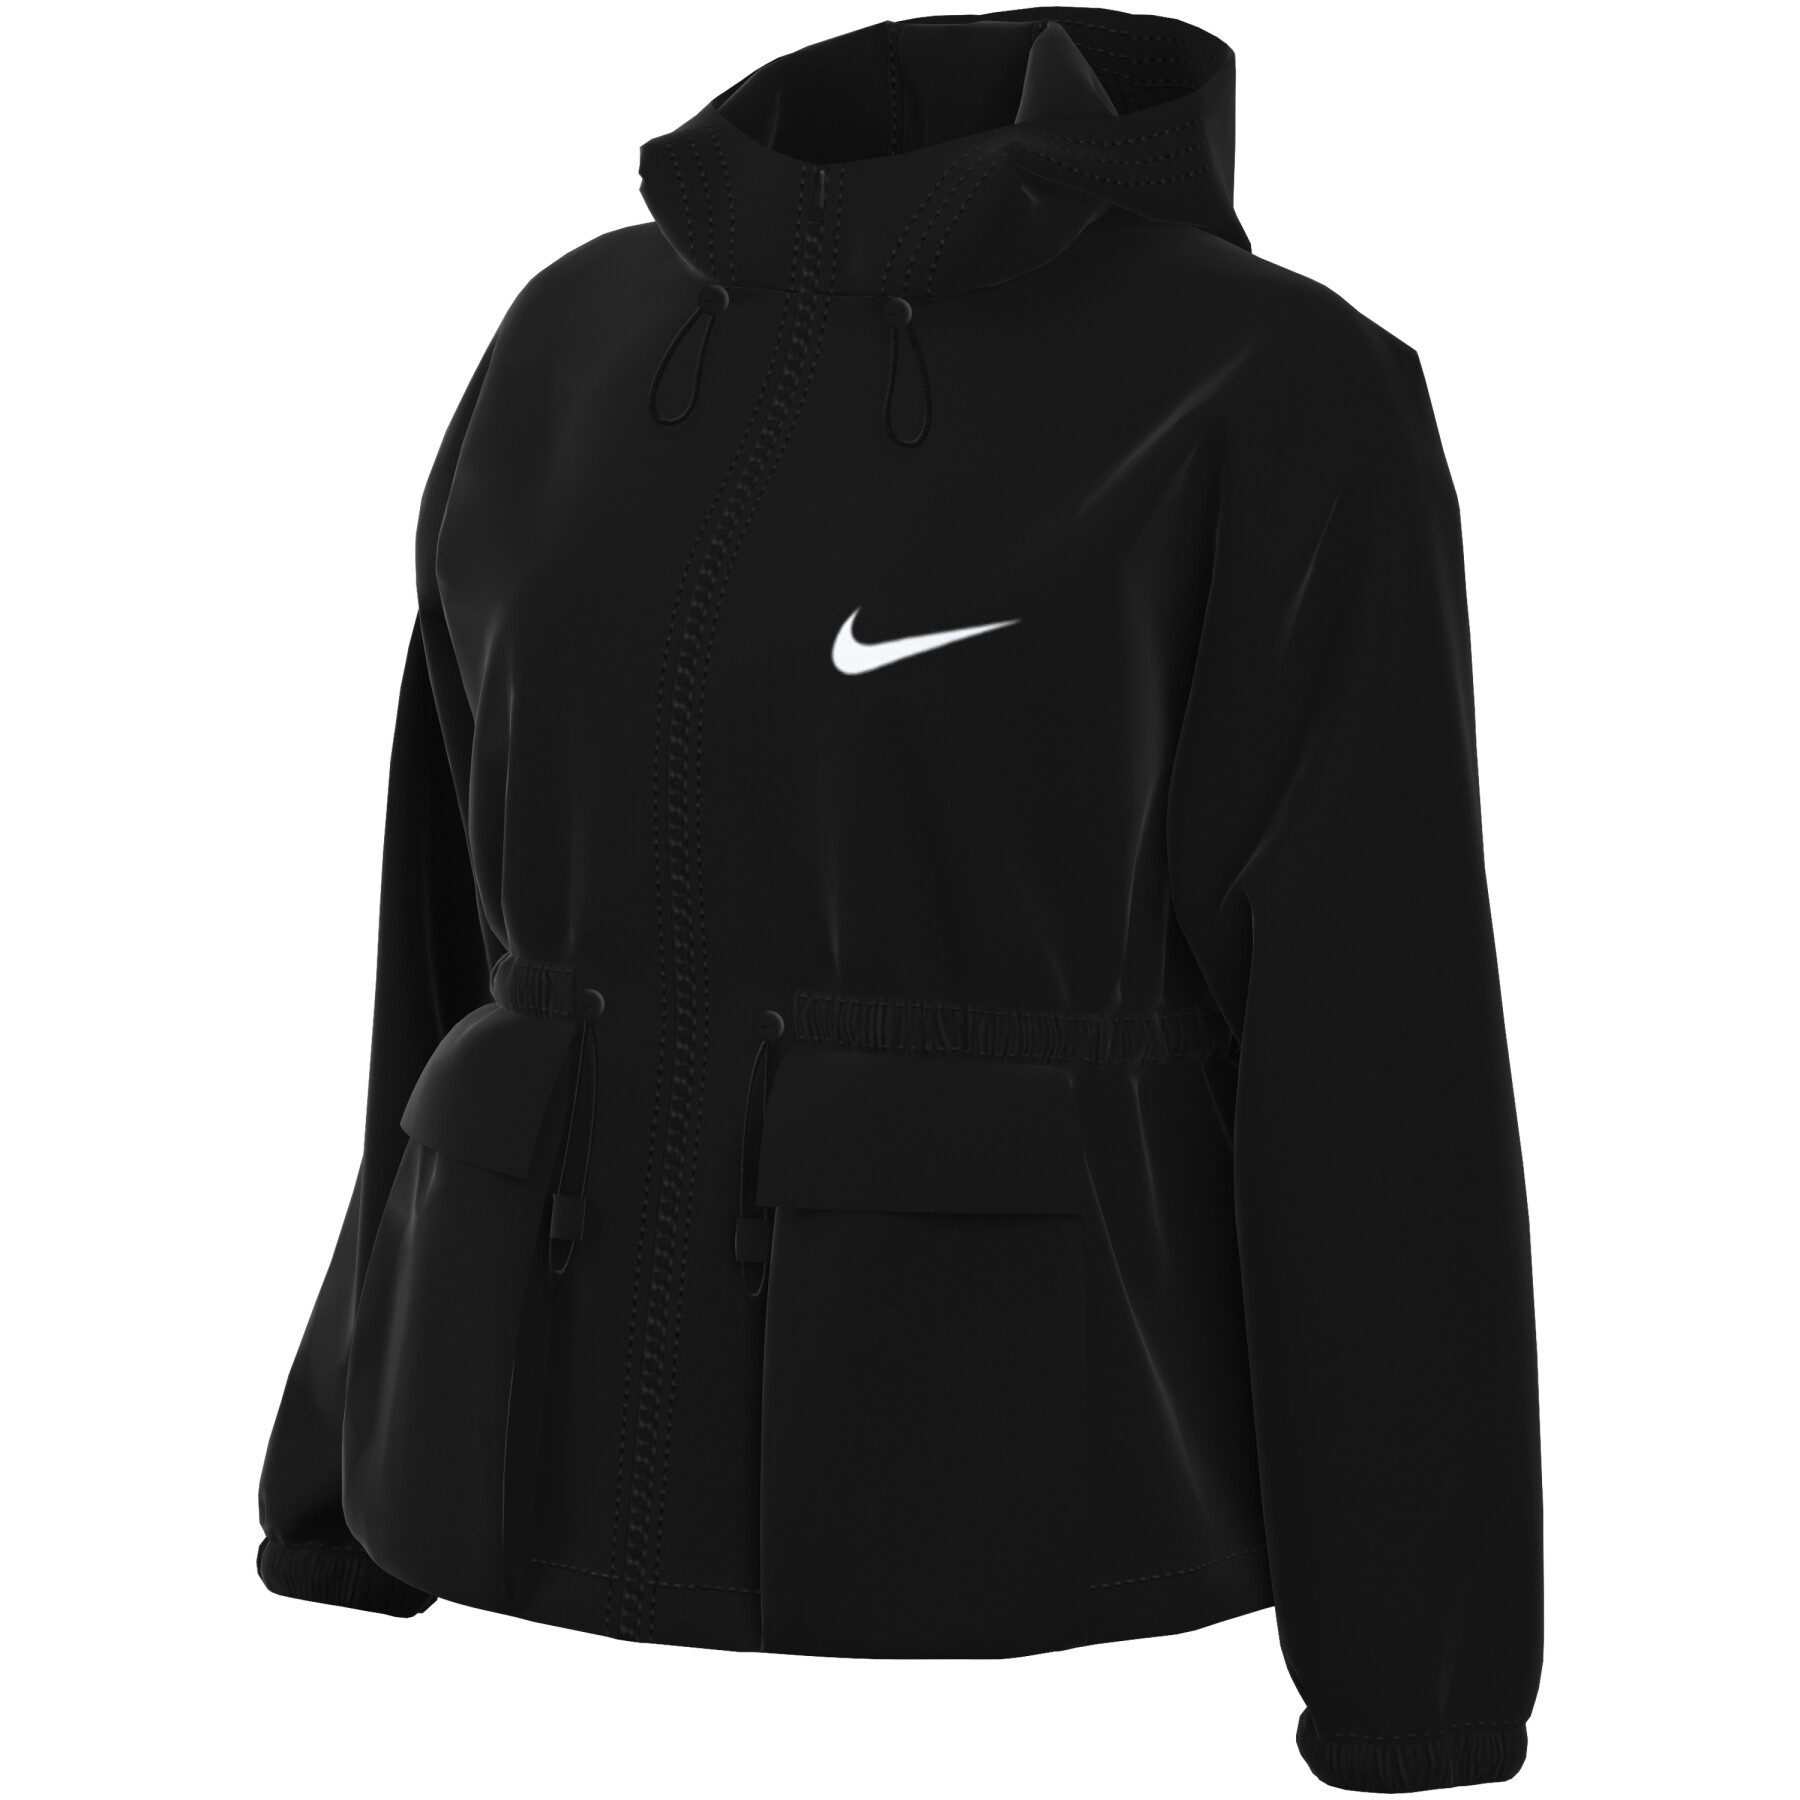 Chaqueta impermeable con capucha oversize para mujer Nike Essential